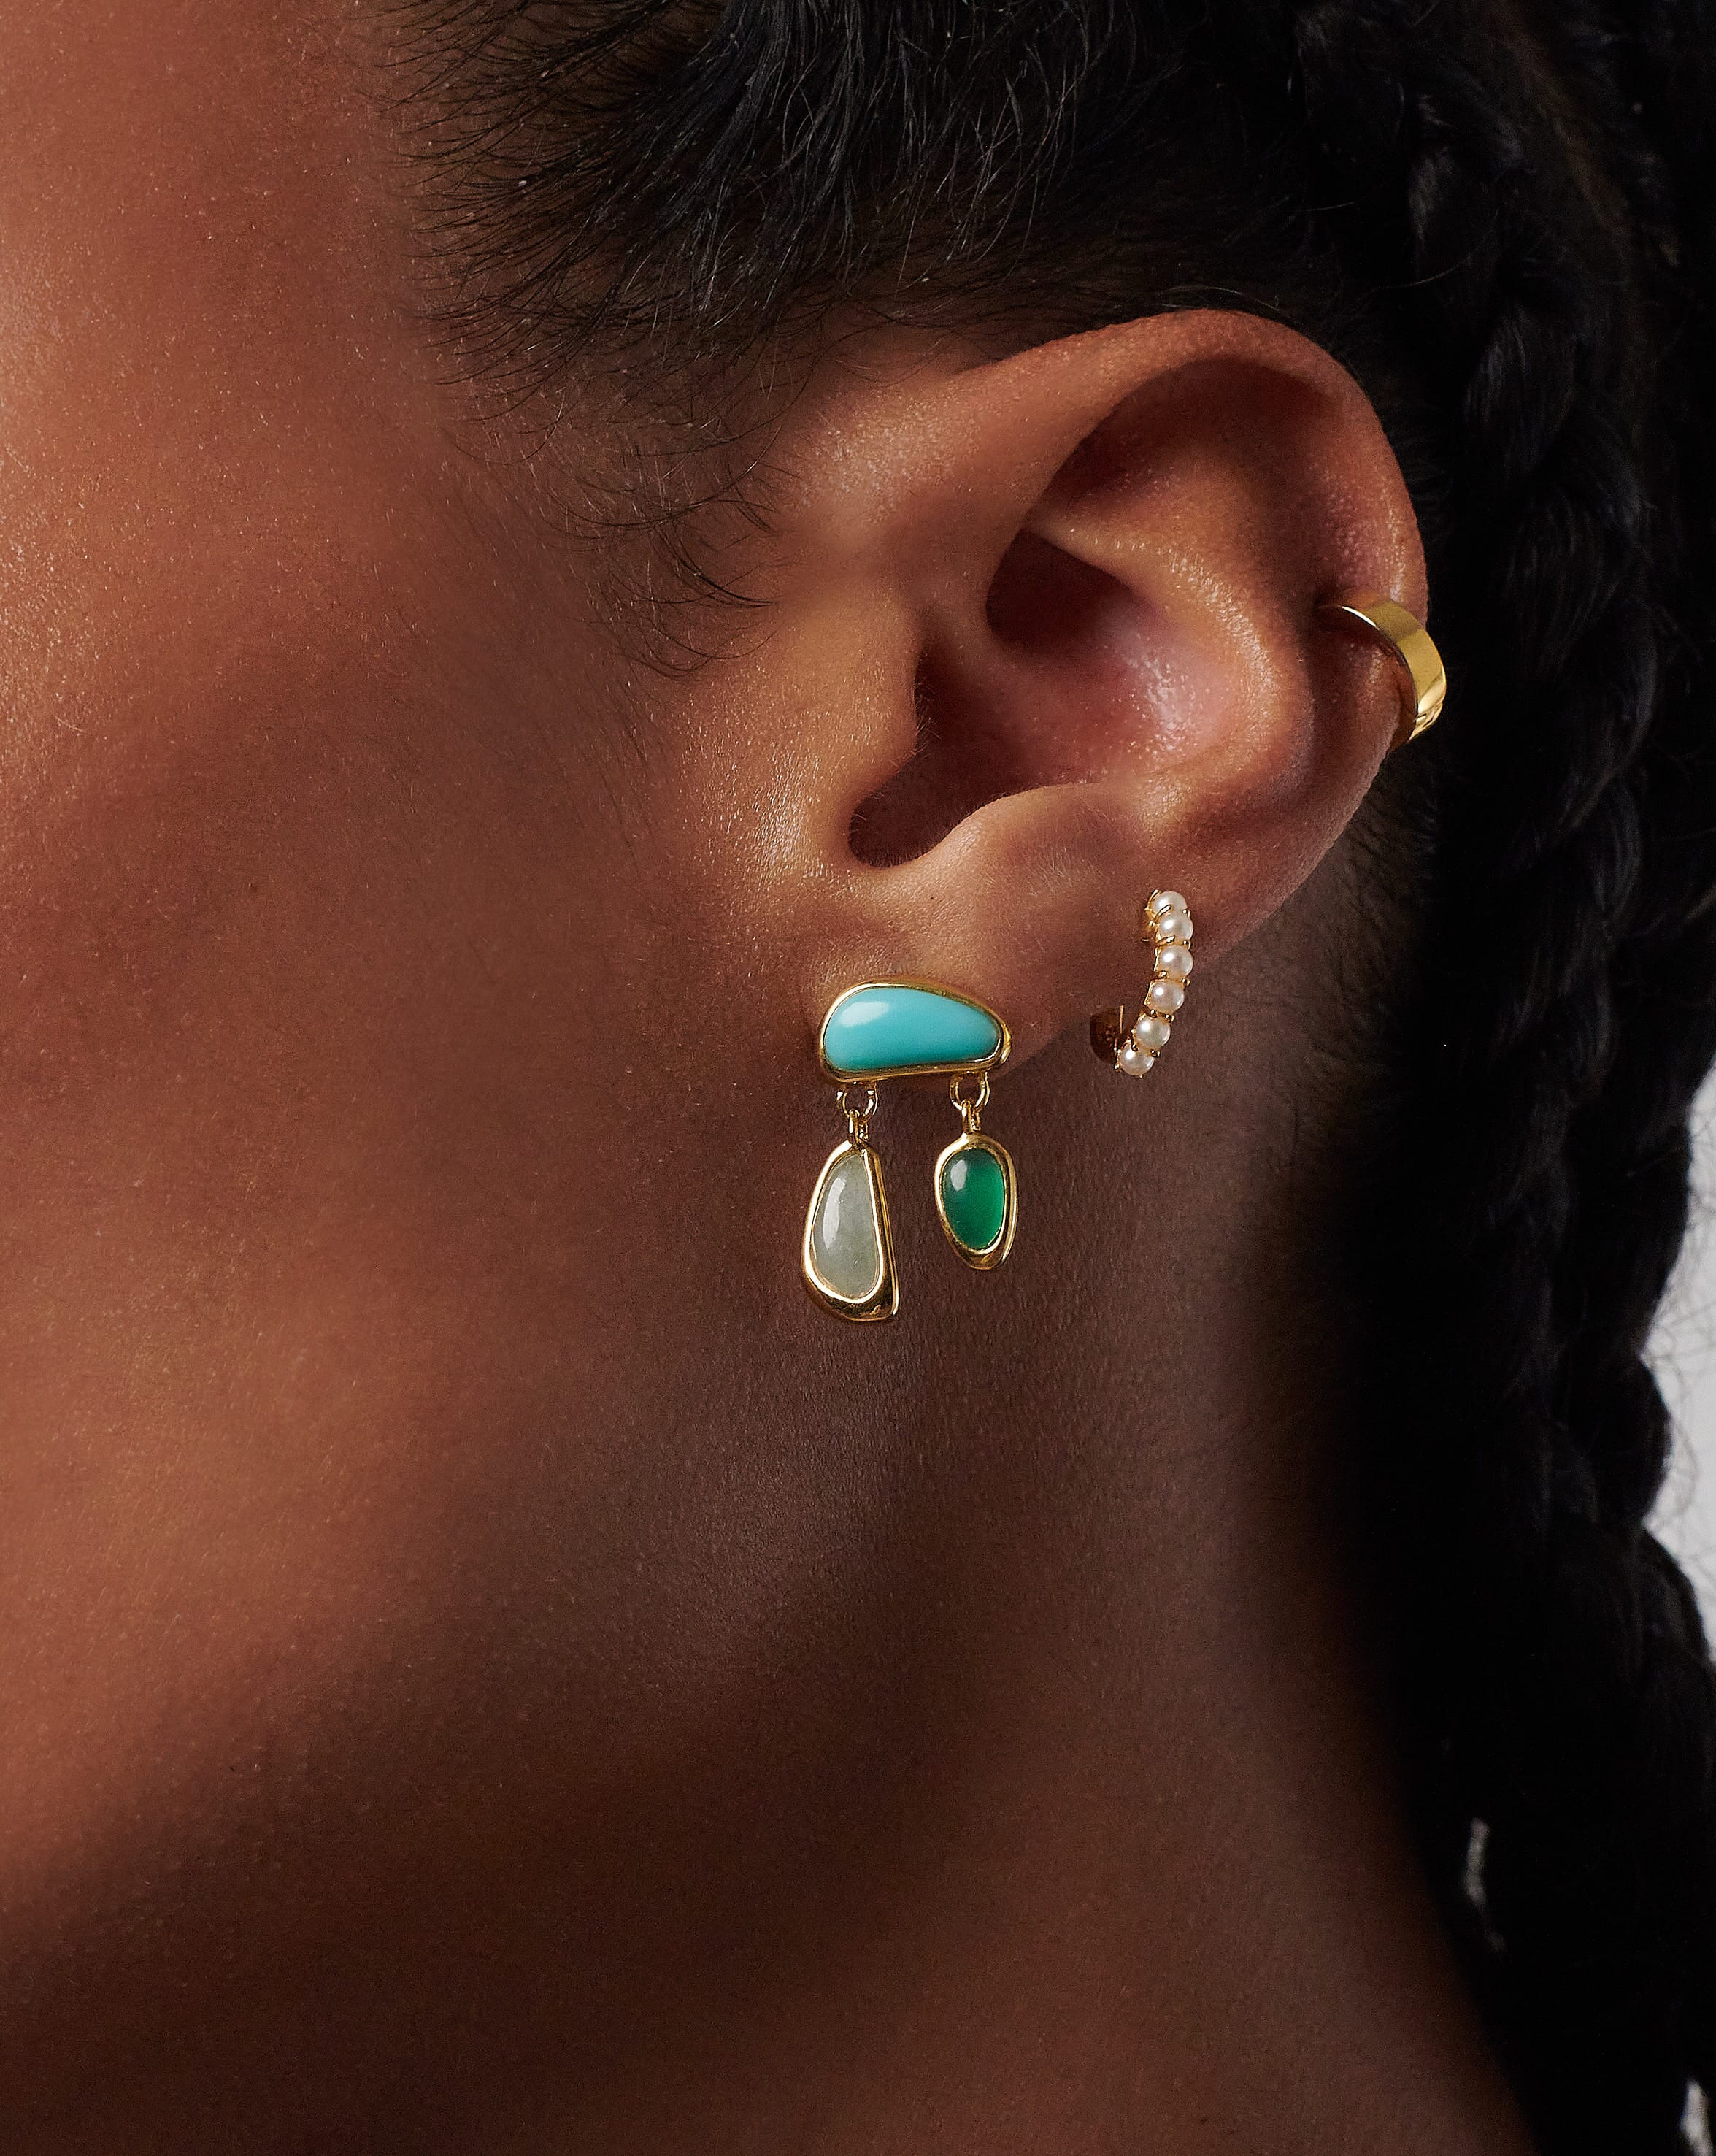 Molten Gemstone Floating Charm Stud Earrings | 18ct Gold Plated/Chalcedony & Turquoise & Aquamarine Earrings Missoma 